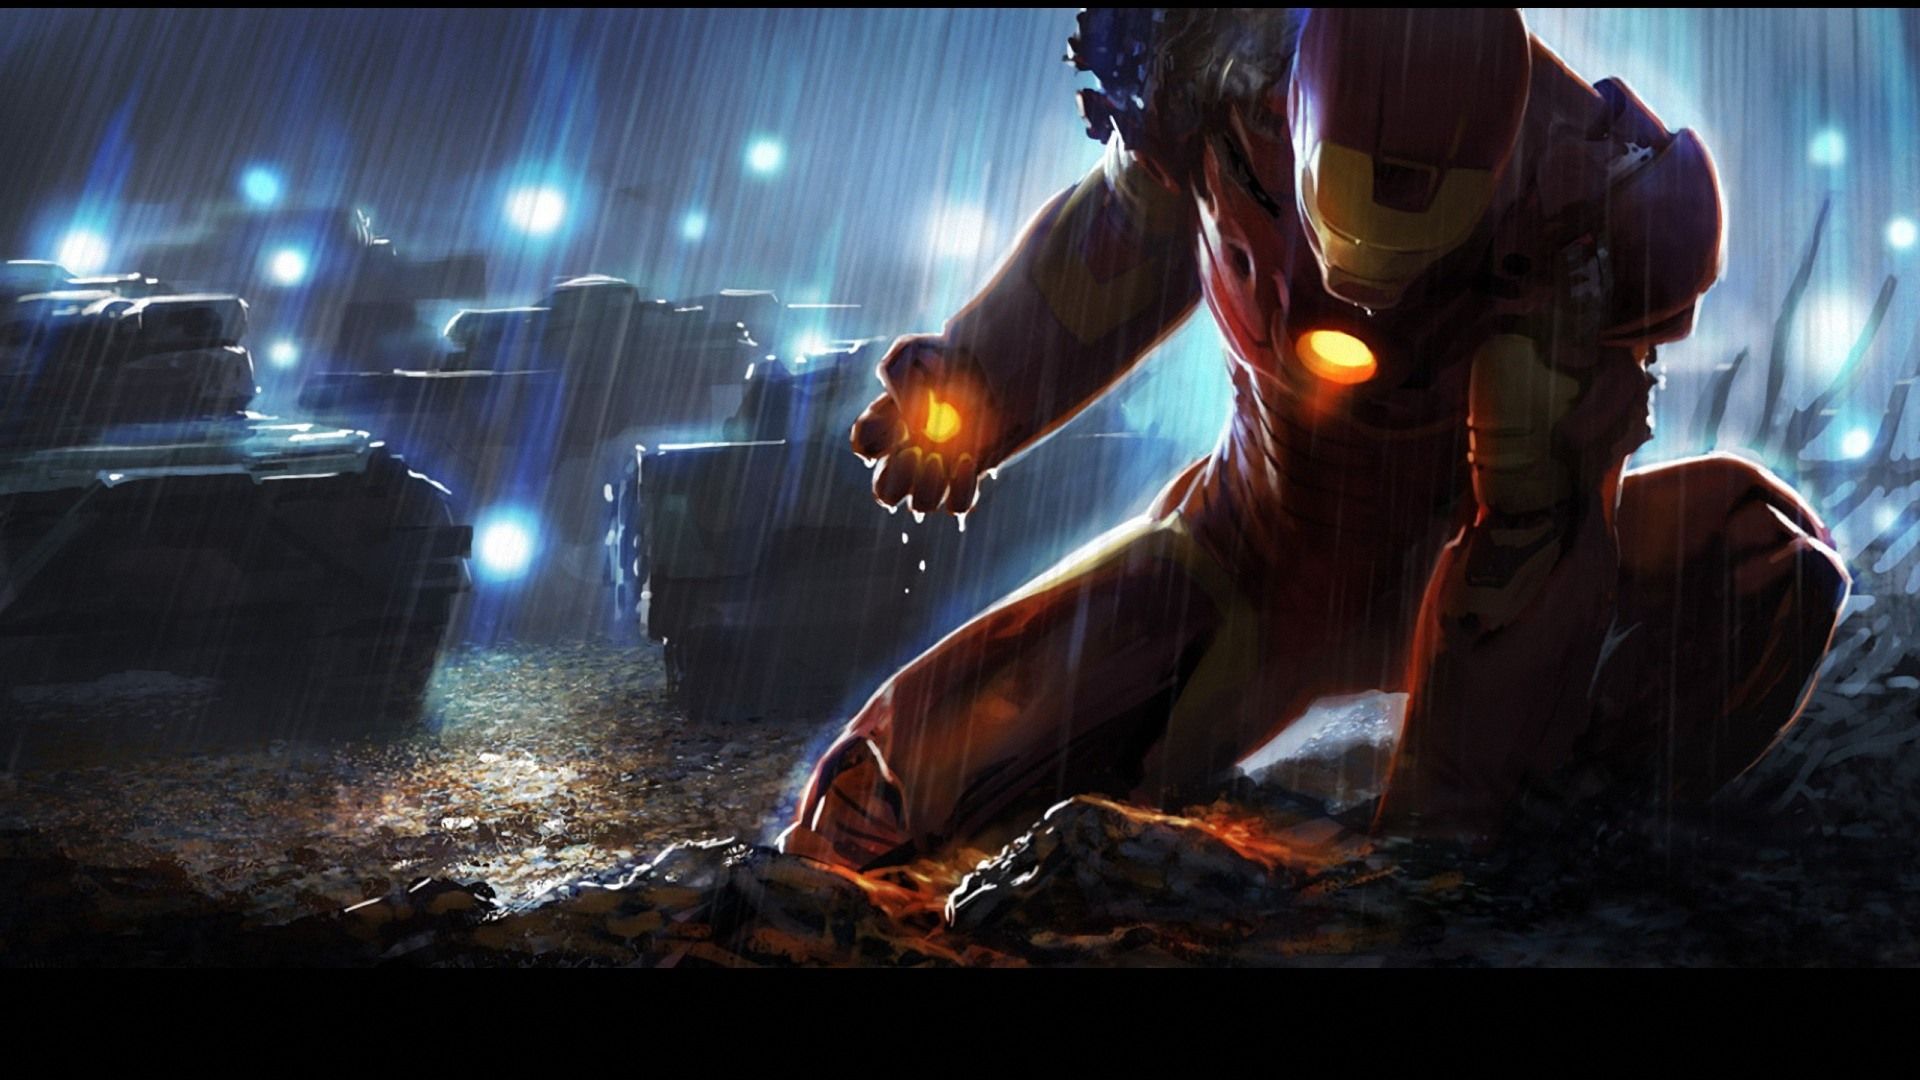 Iron Man power control 1920x1080 Wallpapers, 1920x1080 Wallpapers ...